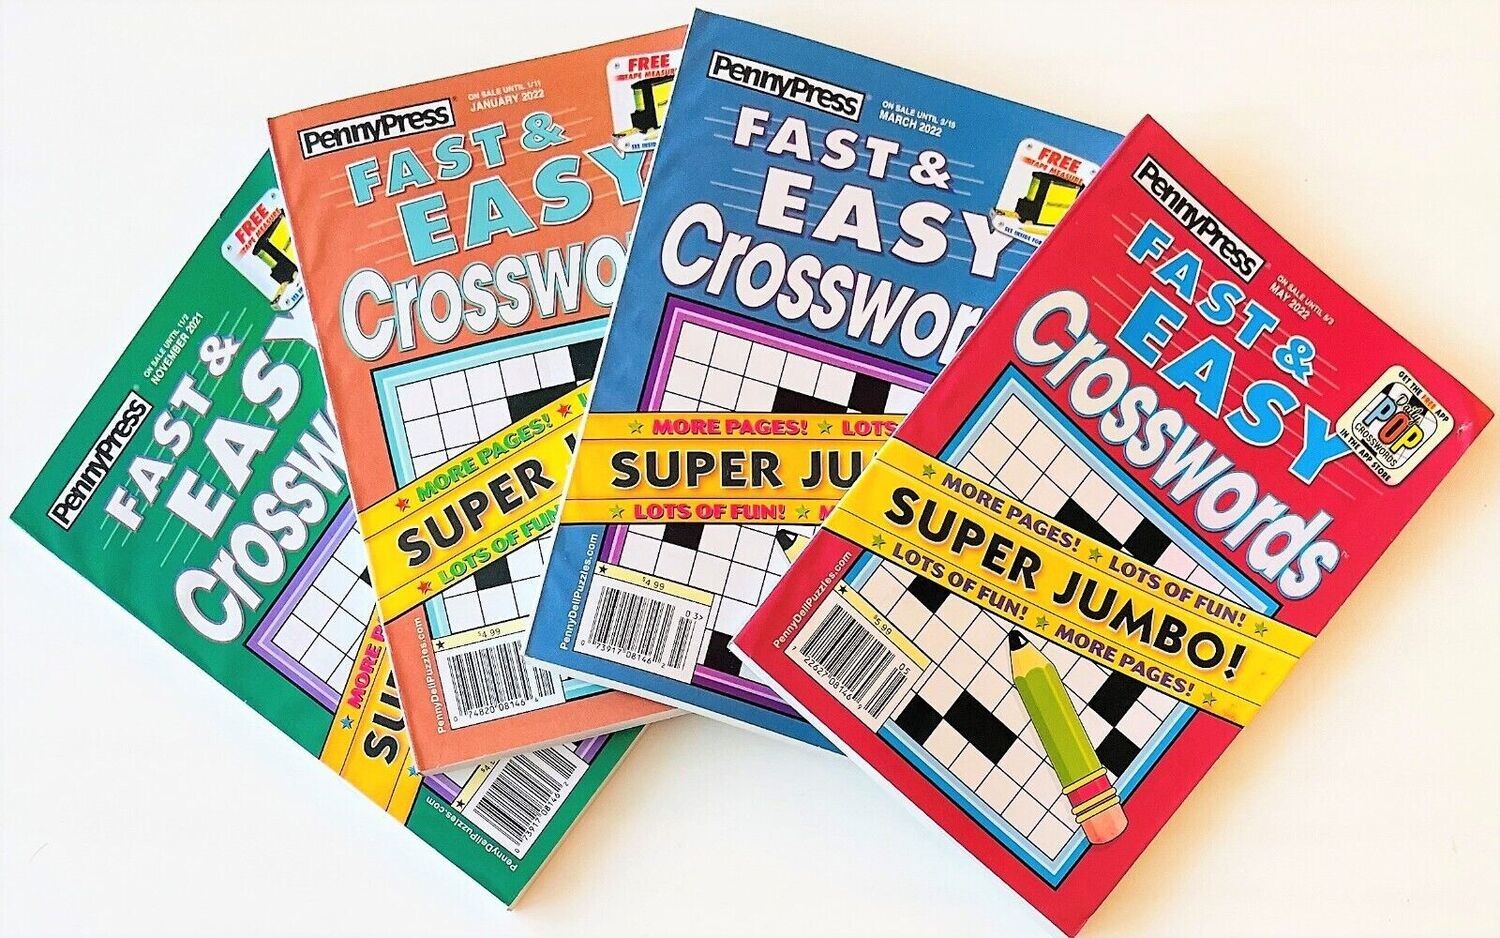 Lot of 4 Penny Press Dell Fast Easy Crosswords Puzzle Books -Free Shipping!